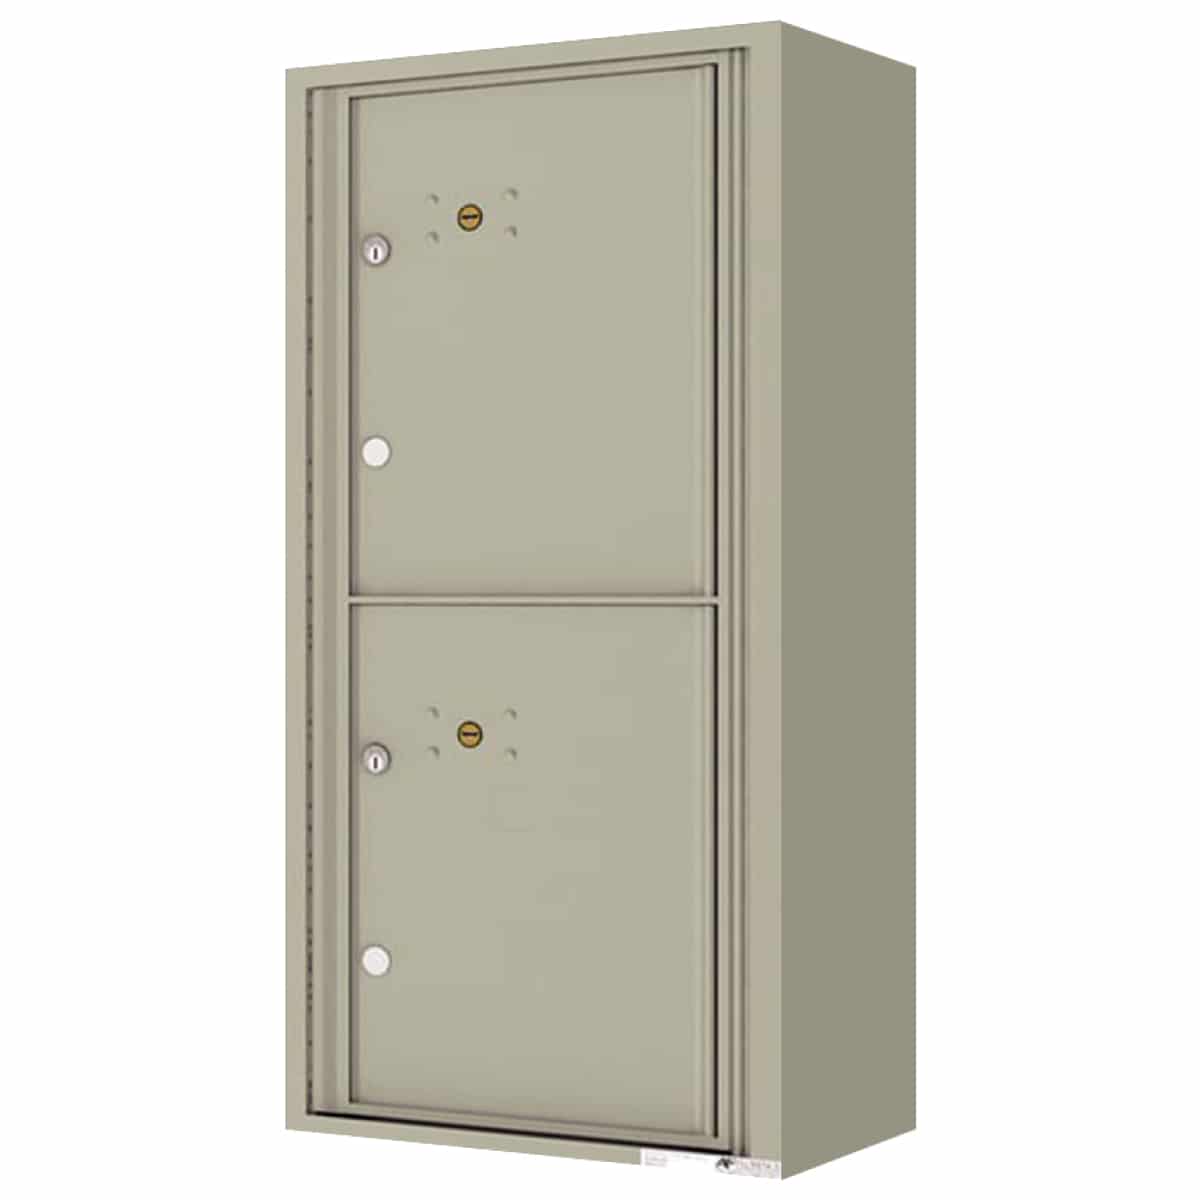 Surface Mount 4C Horizontal Mailbox – 2 Parcel Lockers – Front Loading – 4CADS-2P-SM Product Image